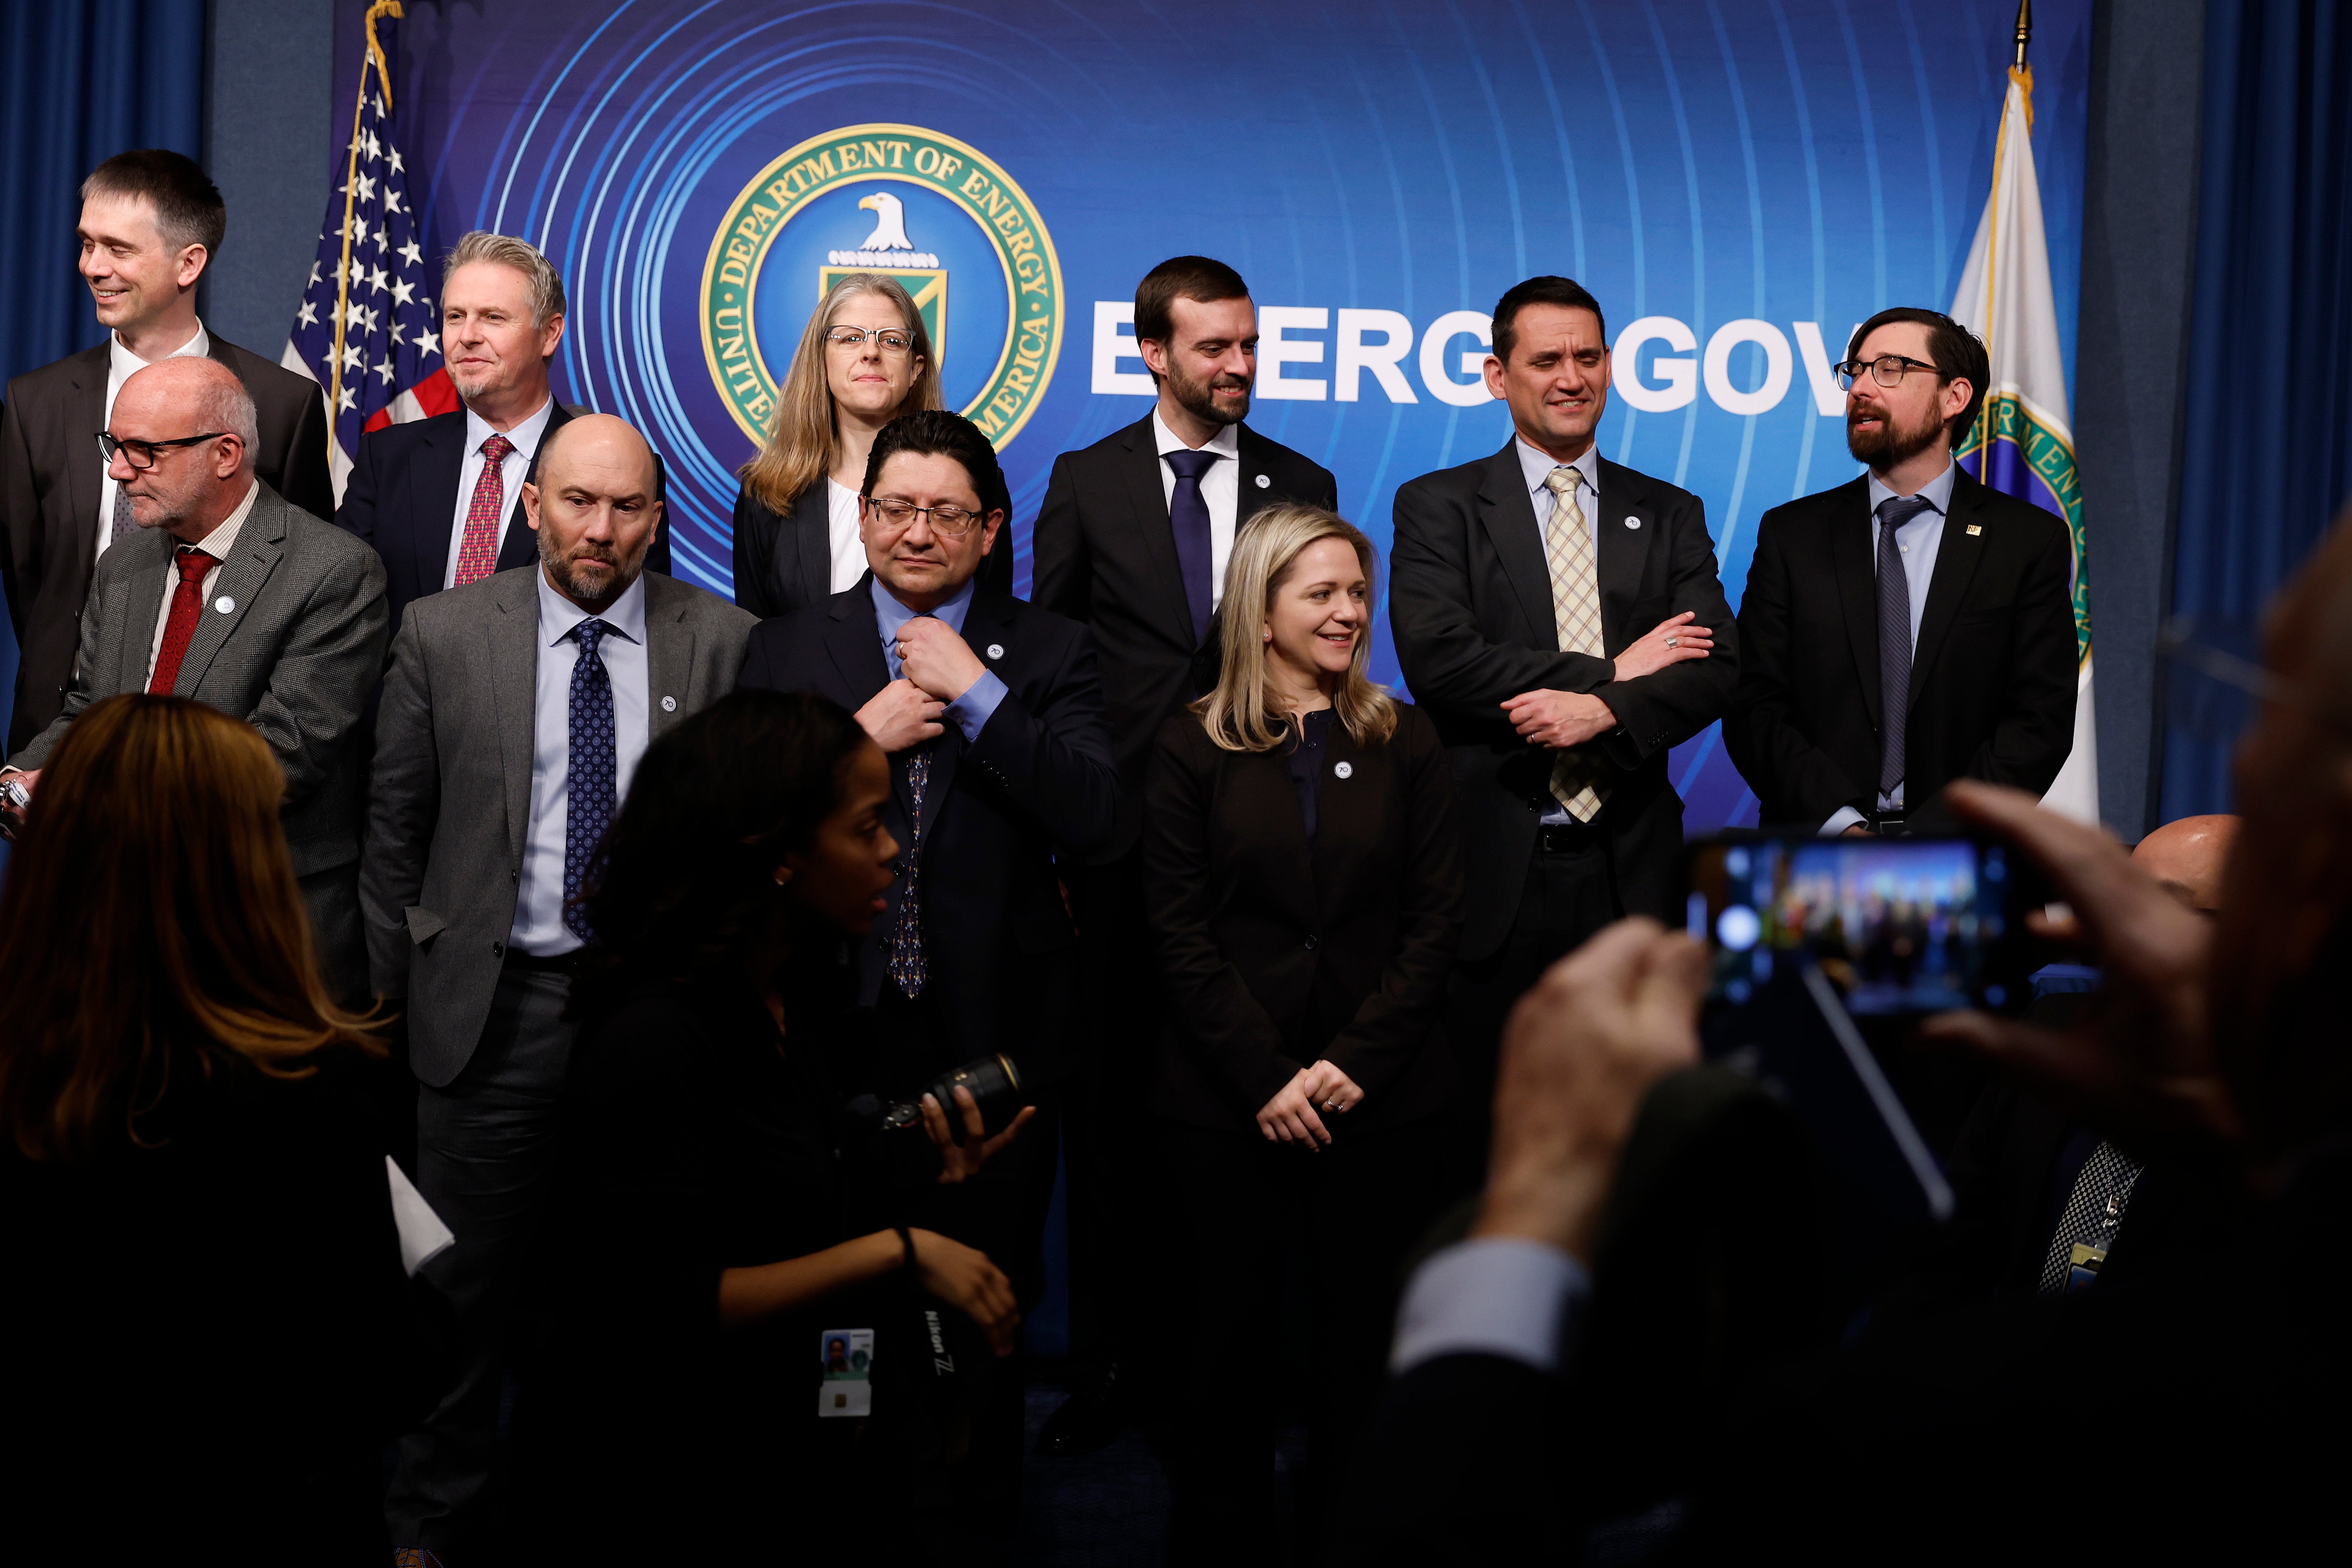 Scientists, engineers and administrators from the Lawrence Livermore National Laboratories prepare for a group photograph at the Department of Energy